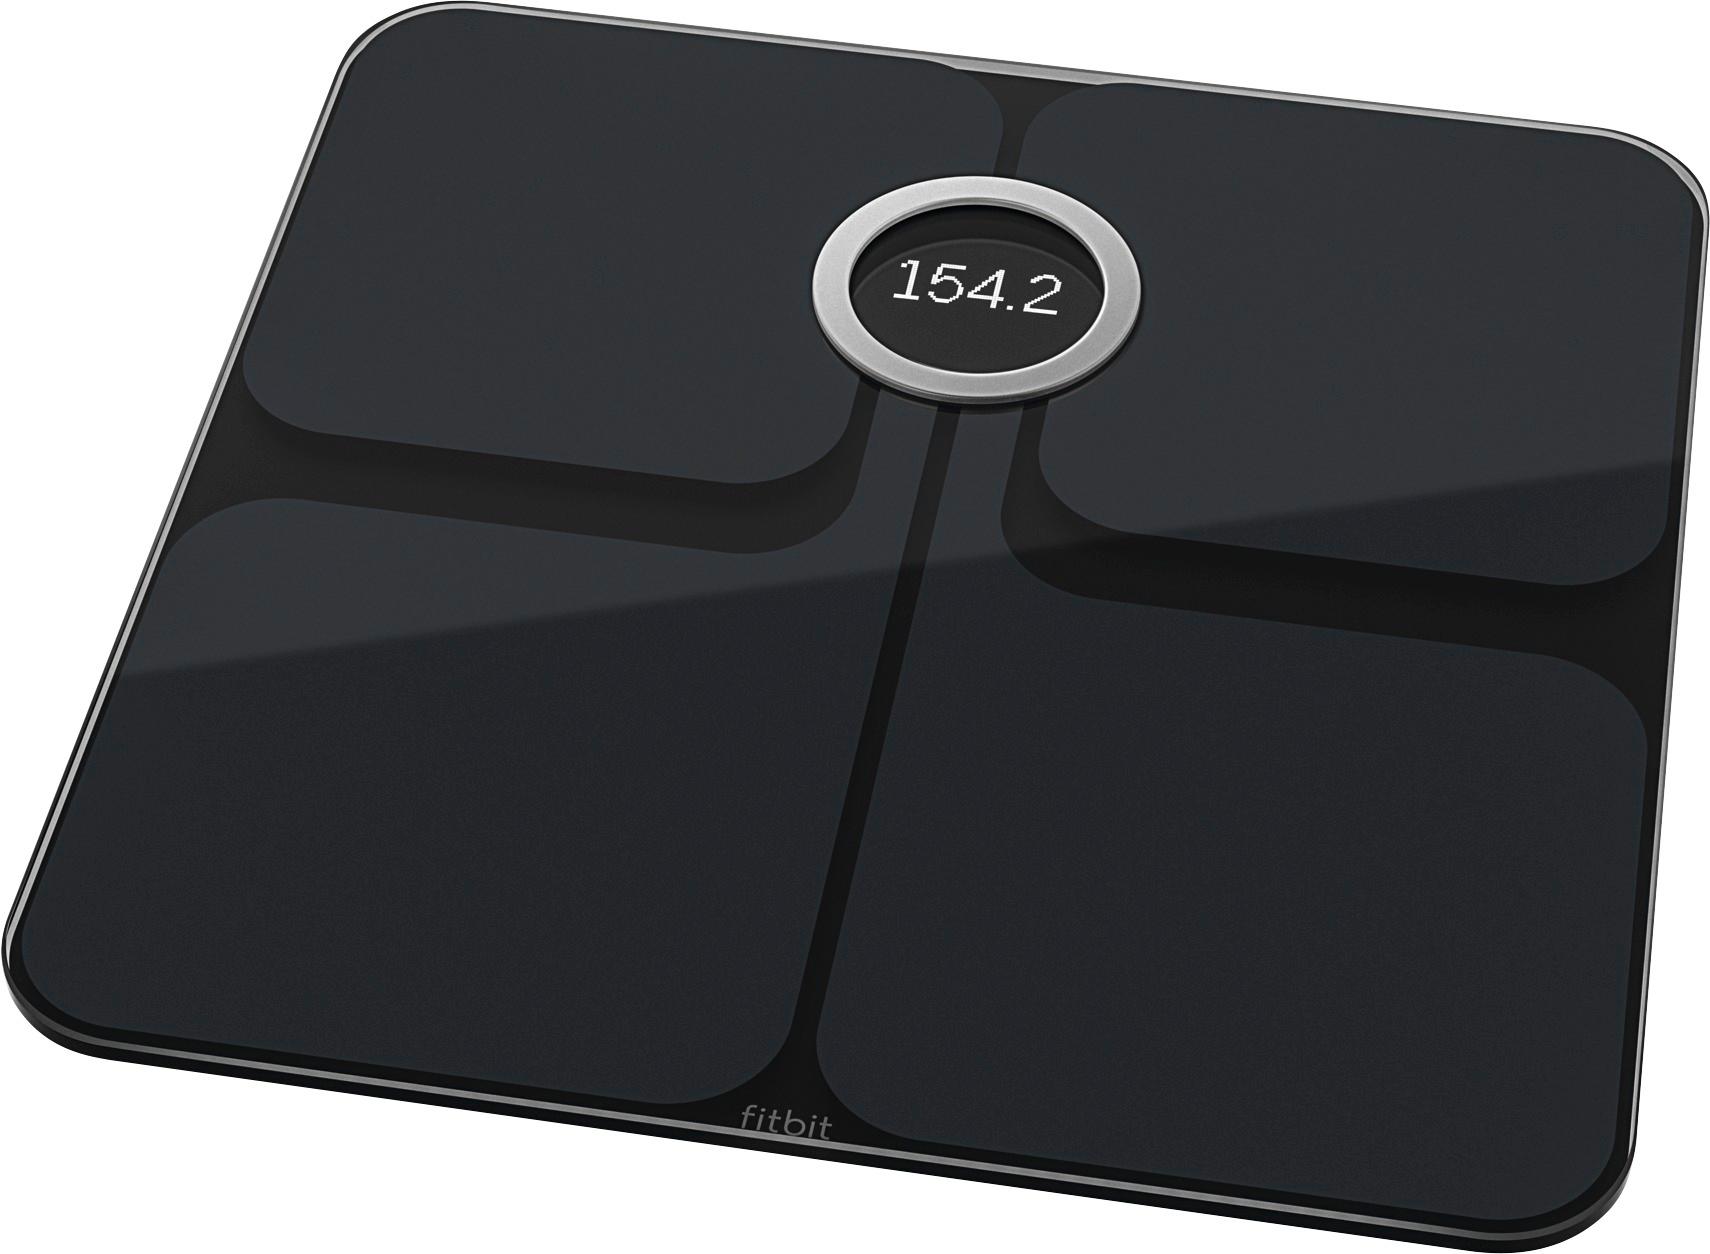 scale-insights-understanding-the-functions-of-the-fitbit-scale